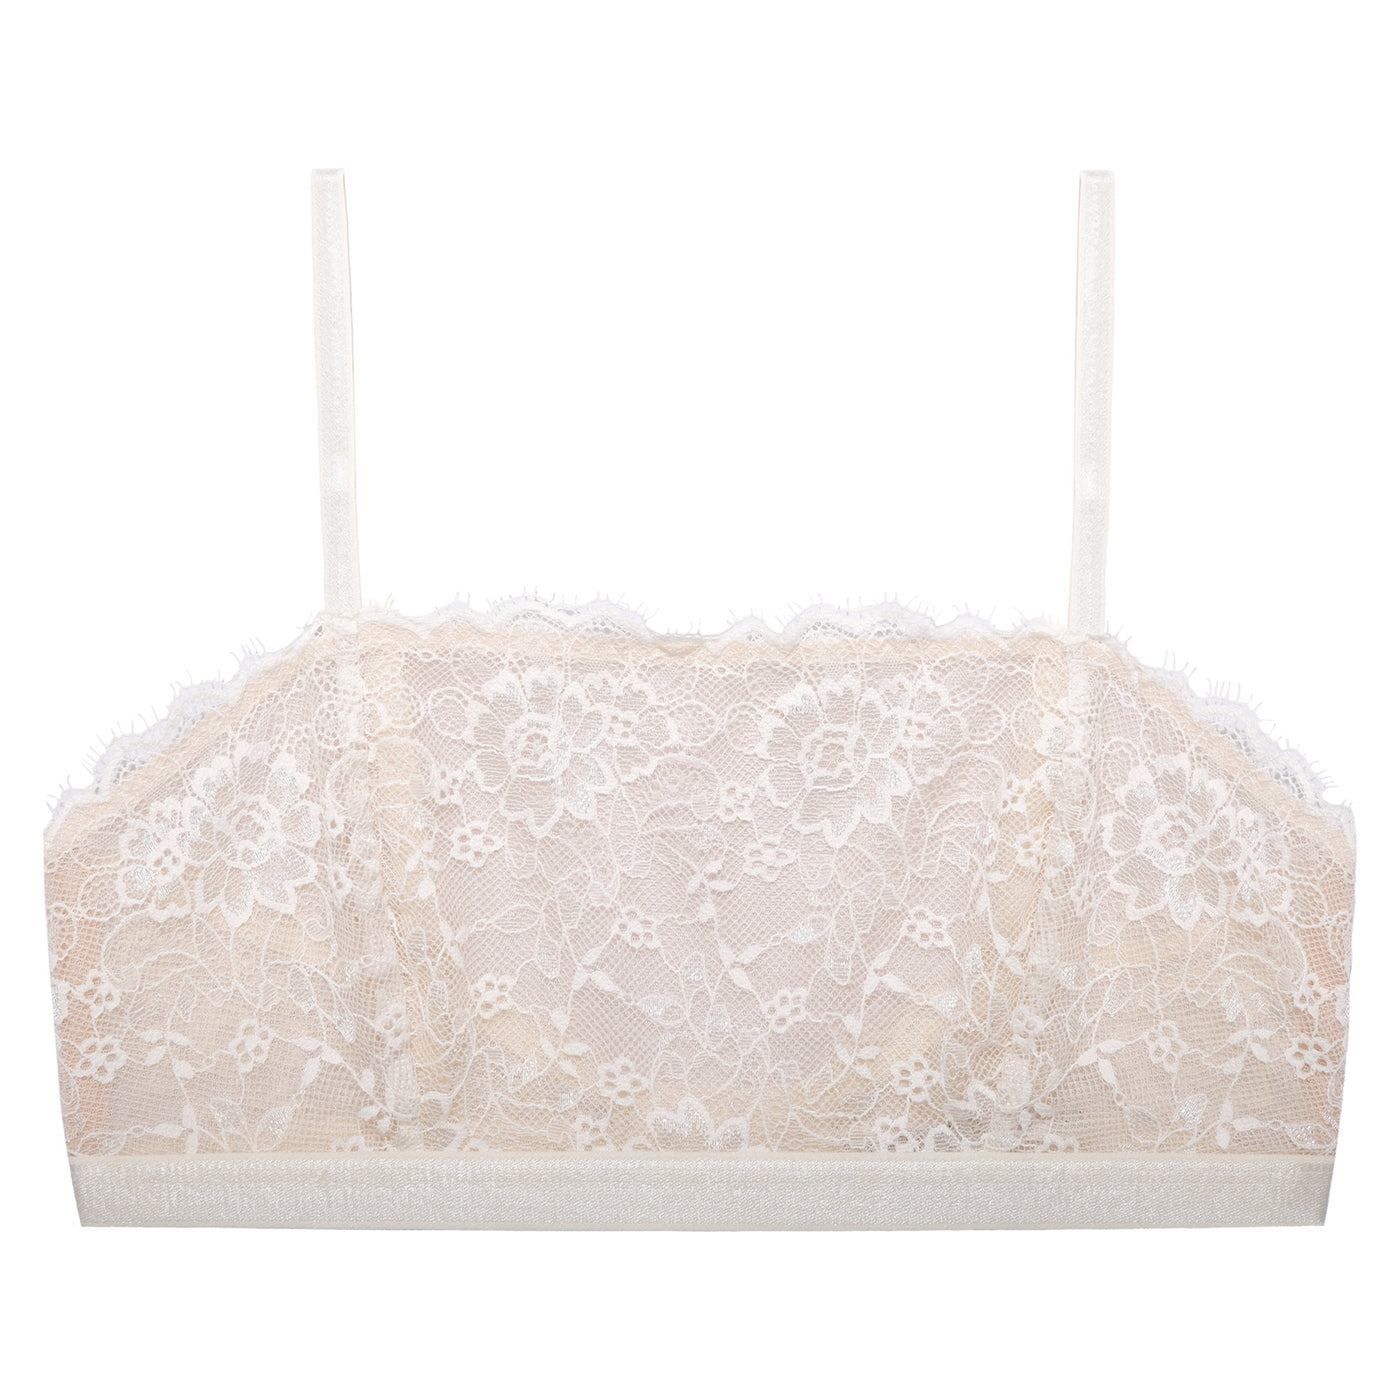 Underprotection Amy Bandeau White. 